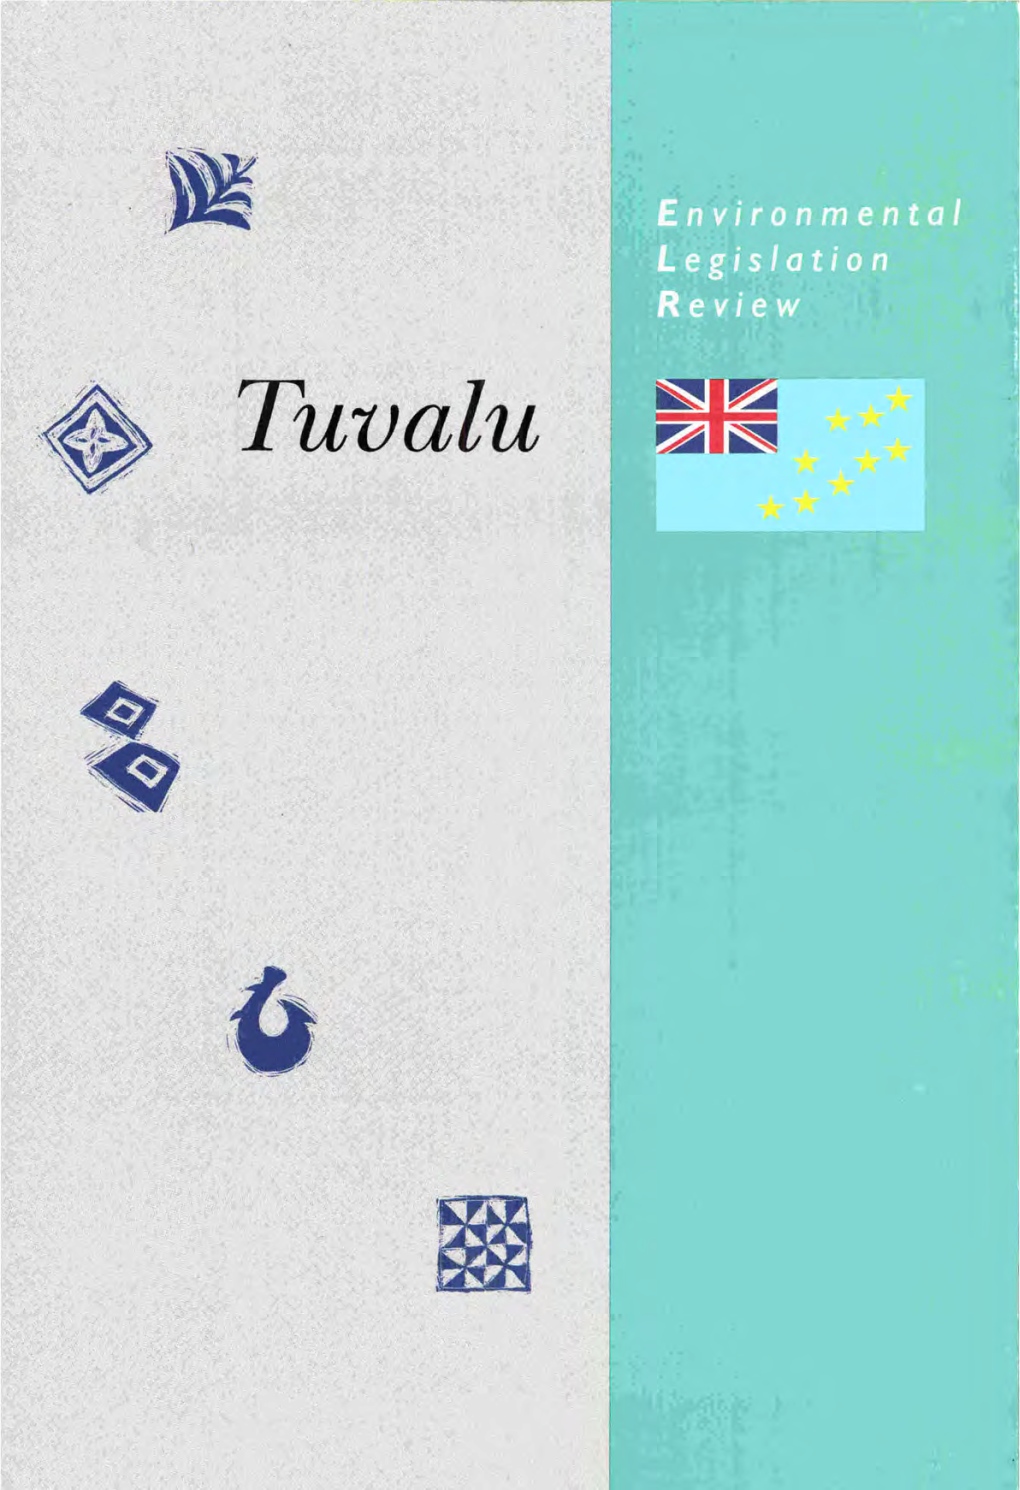 Tuvalu / by Mere Hrlea and David Farrier